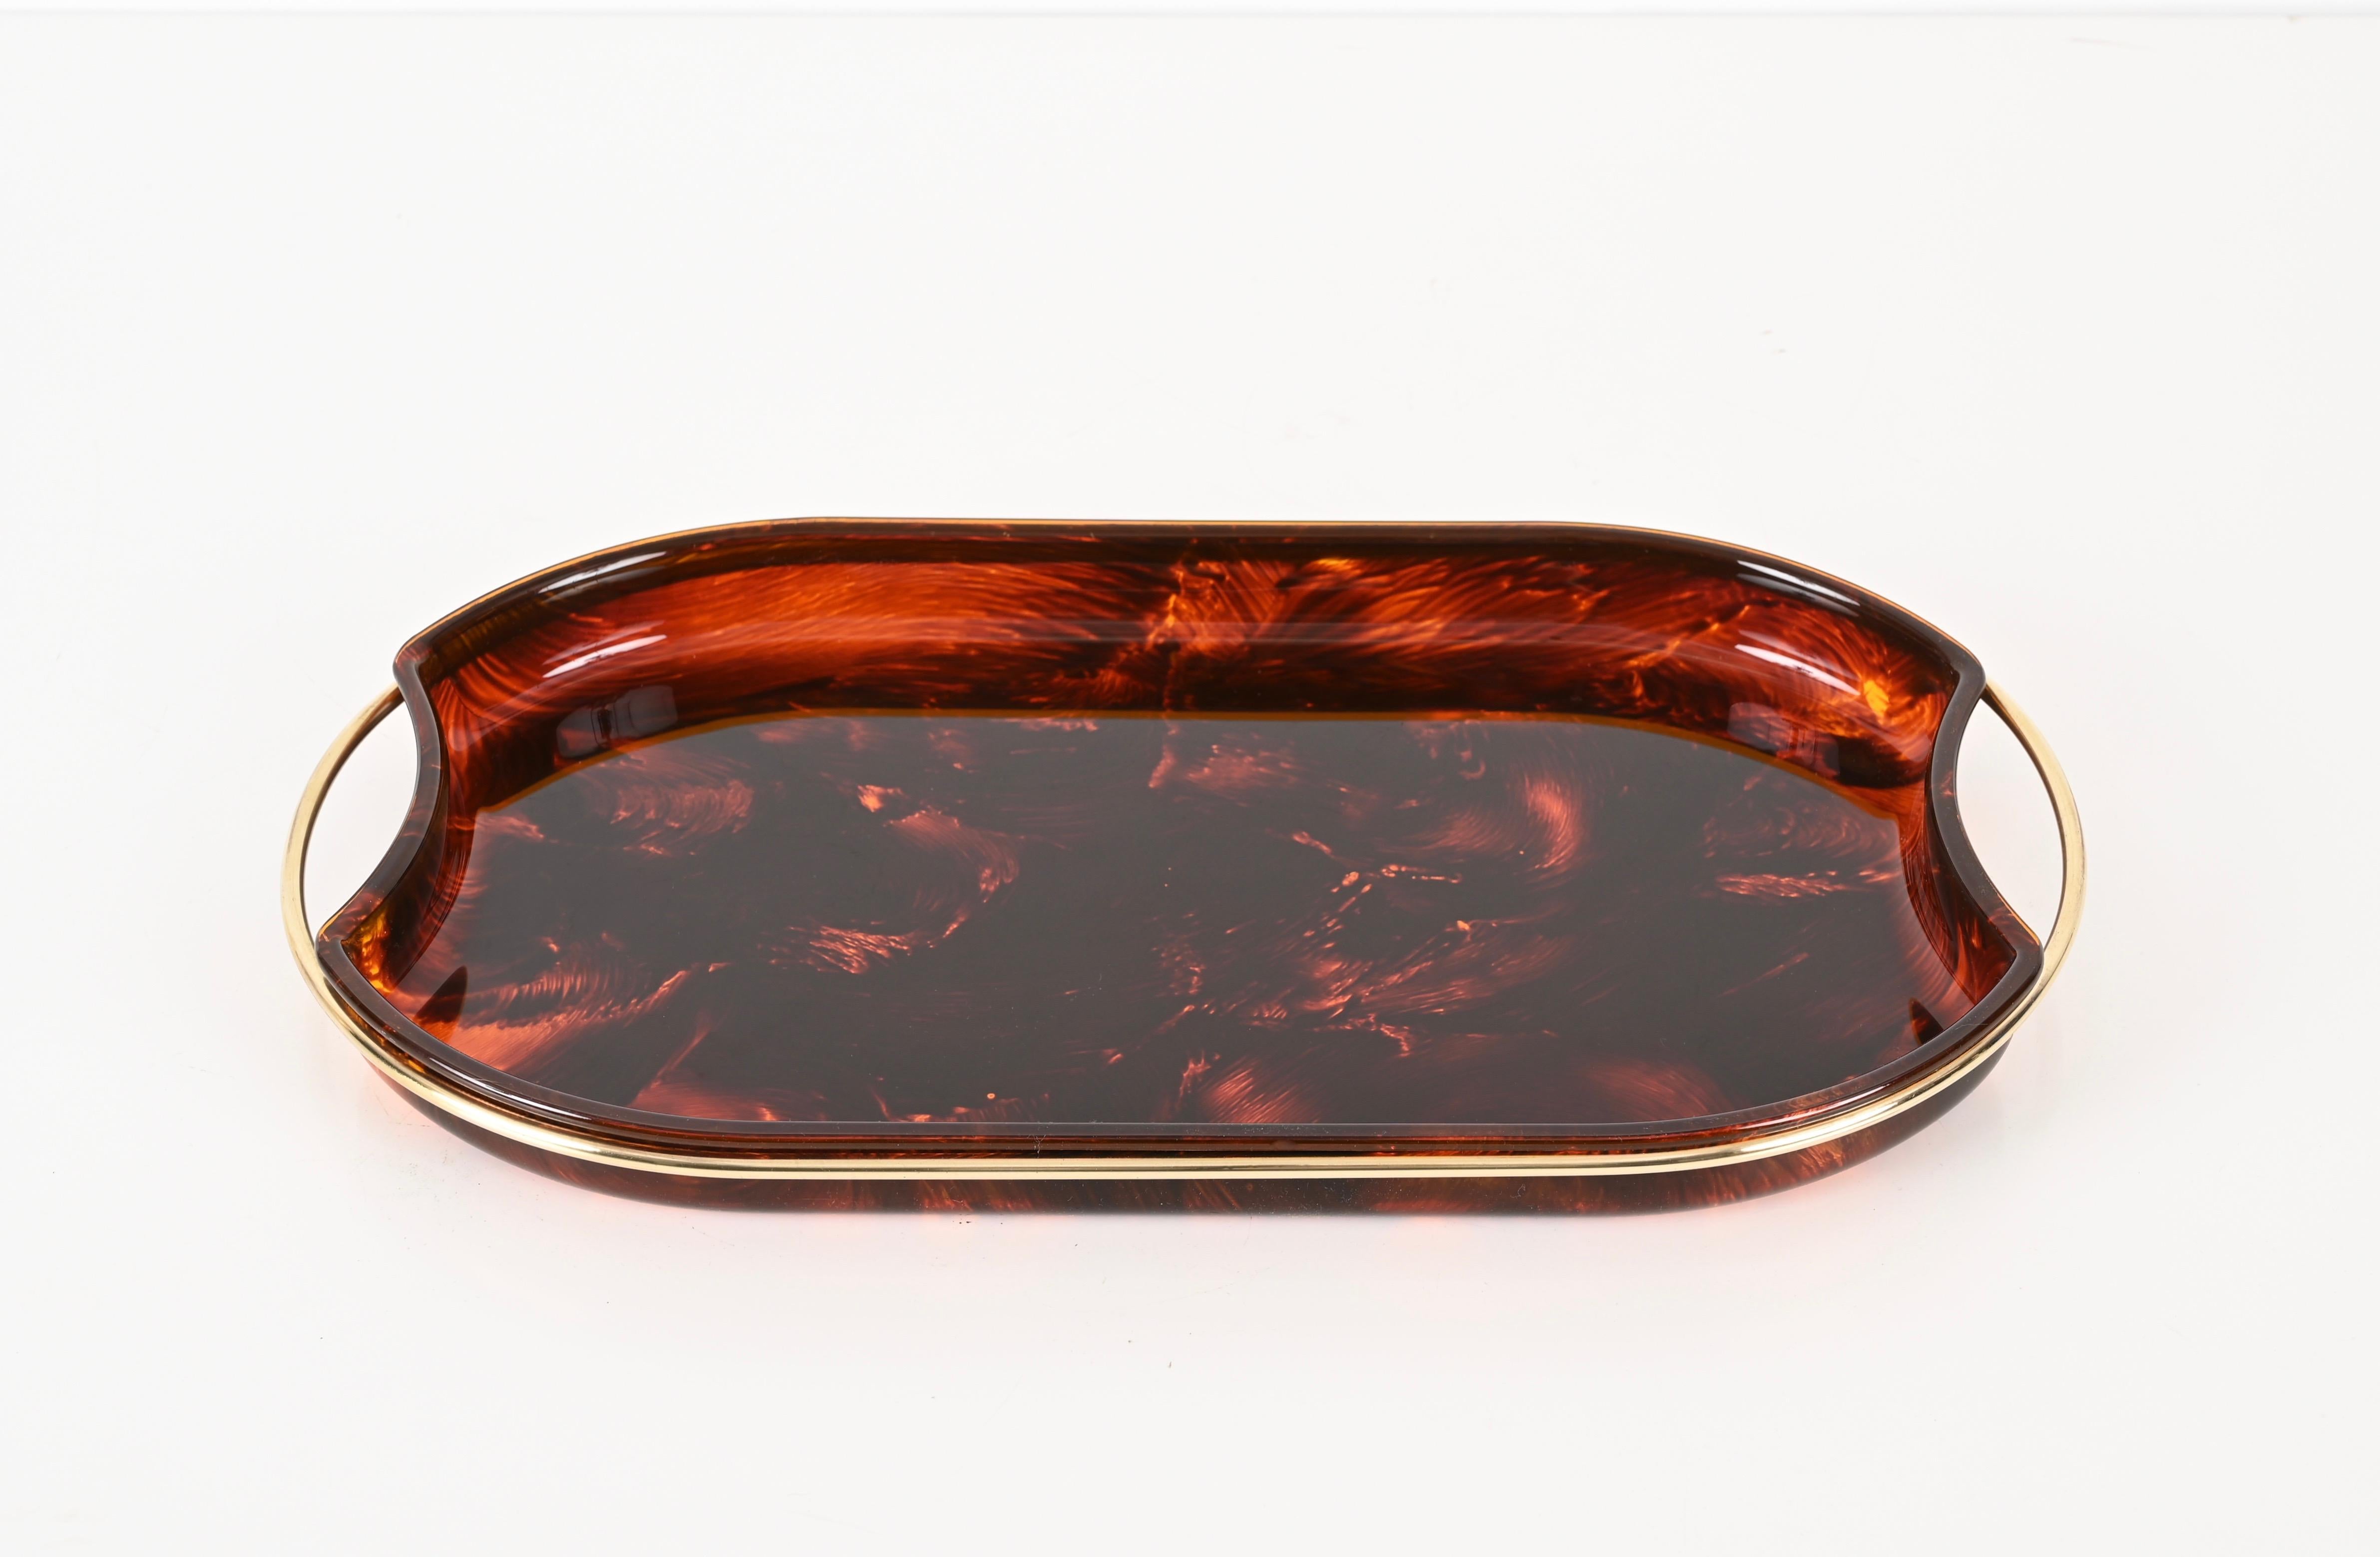 Midcentury Modern By Guzzini Italian Lucite and Brass Oval Serving Tray, 1970s For Sale 1